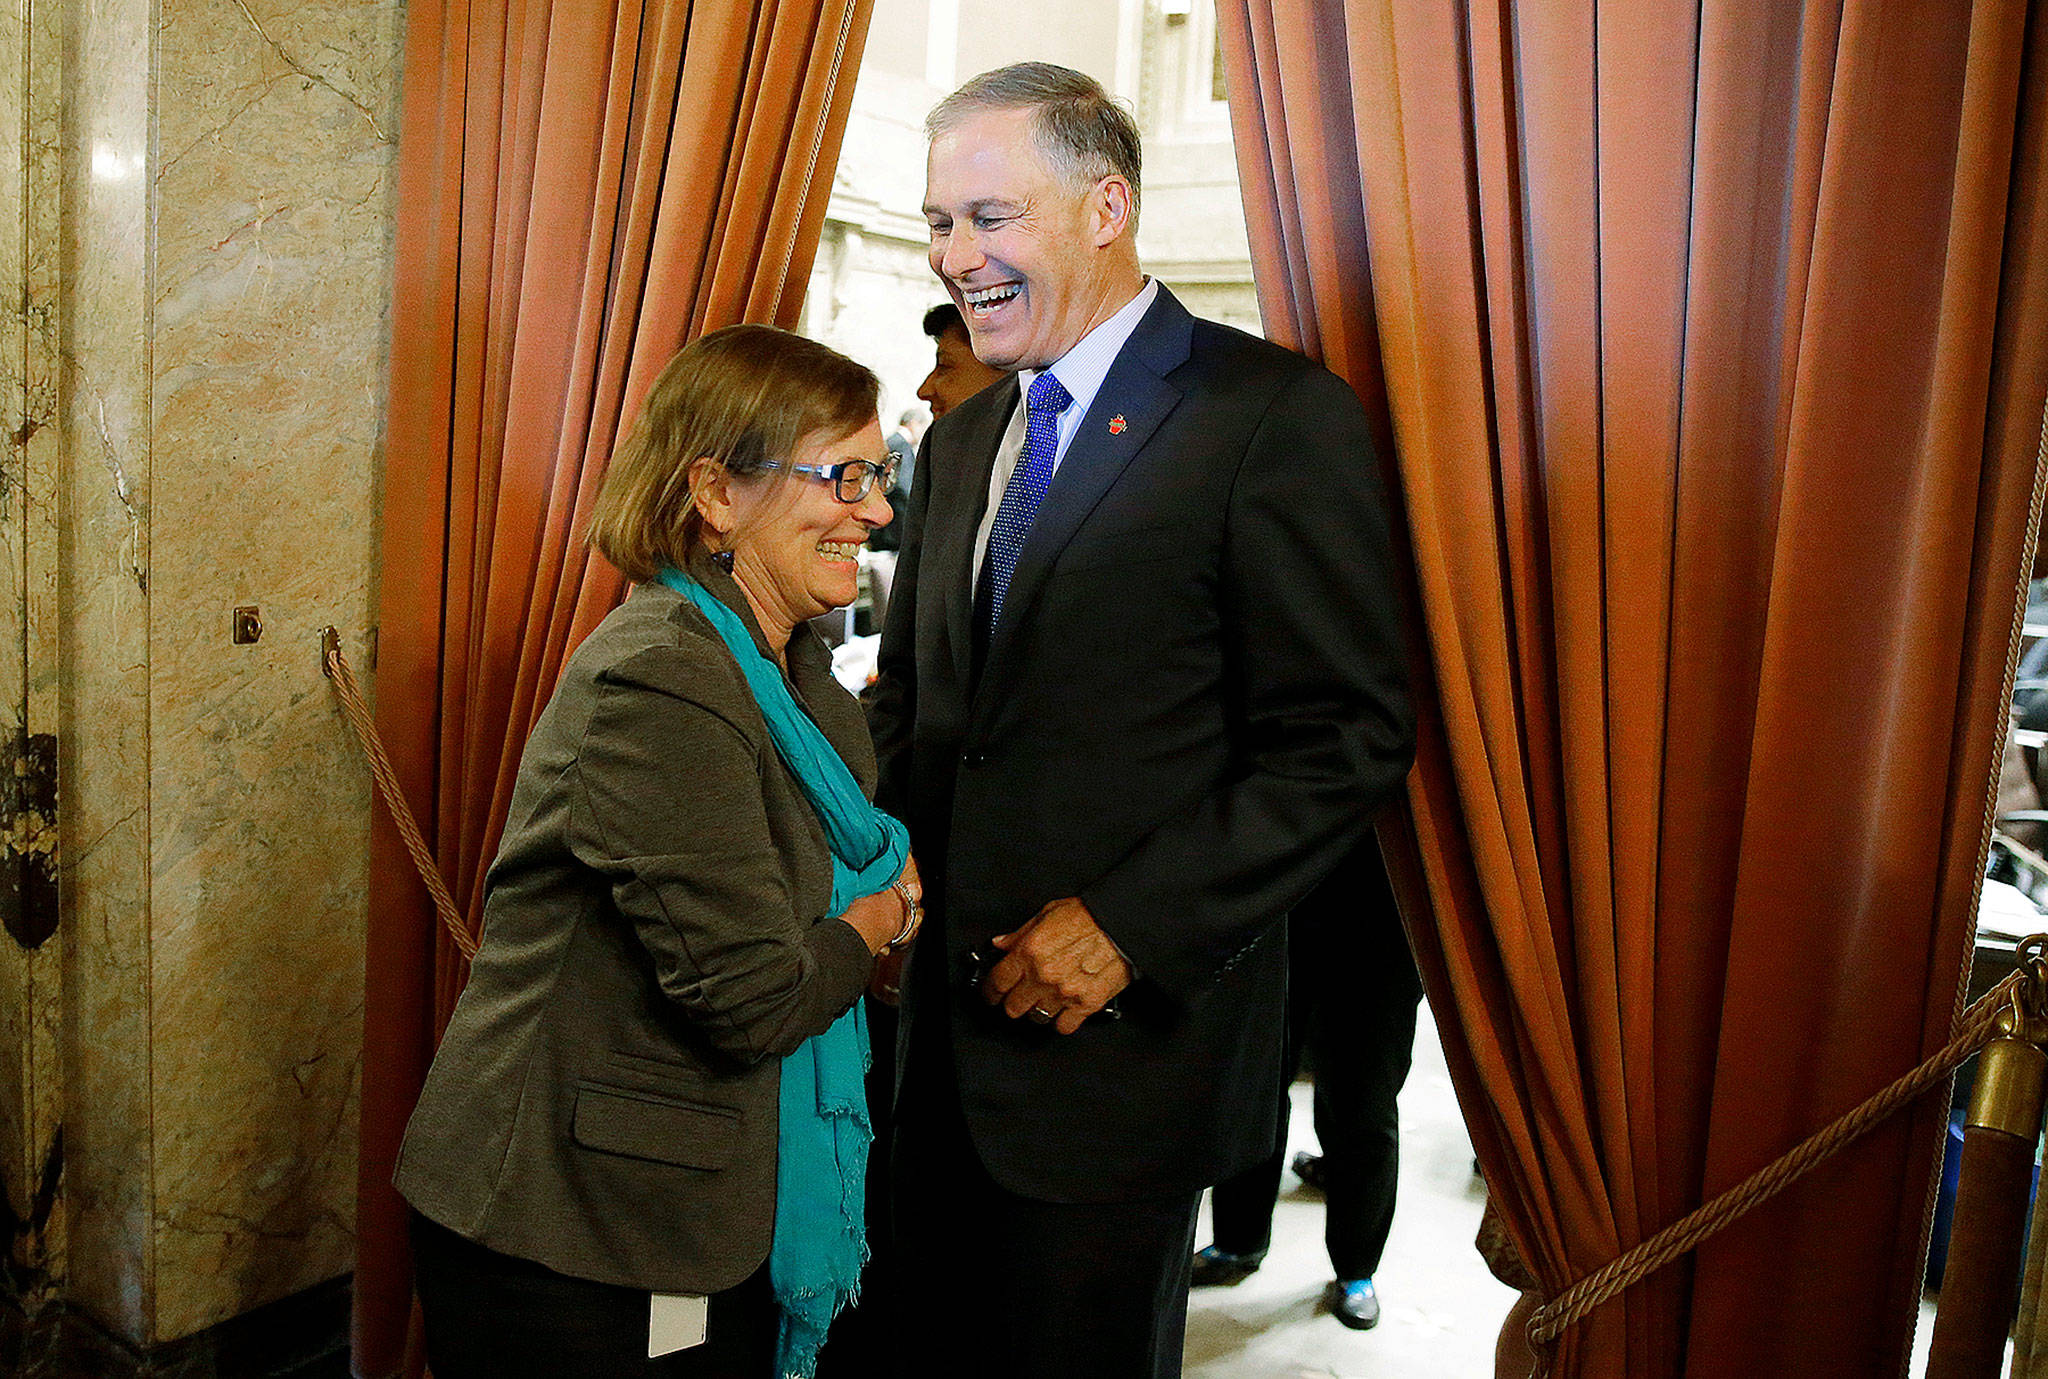 Washington Gov. Jay Inslee (right) greets Rep. June Robinson, D-Everett, in the wings of the House chamber at the Capitol in Olympia after the Legislature approved a new two-year state operating budget. (AP Photo/Ted S. Warren)